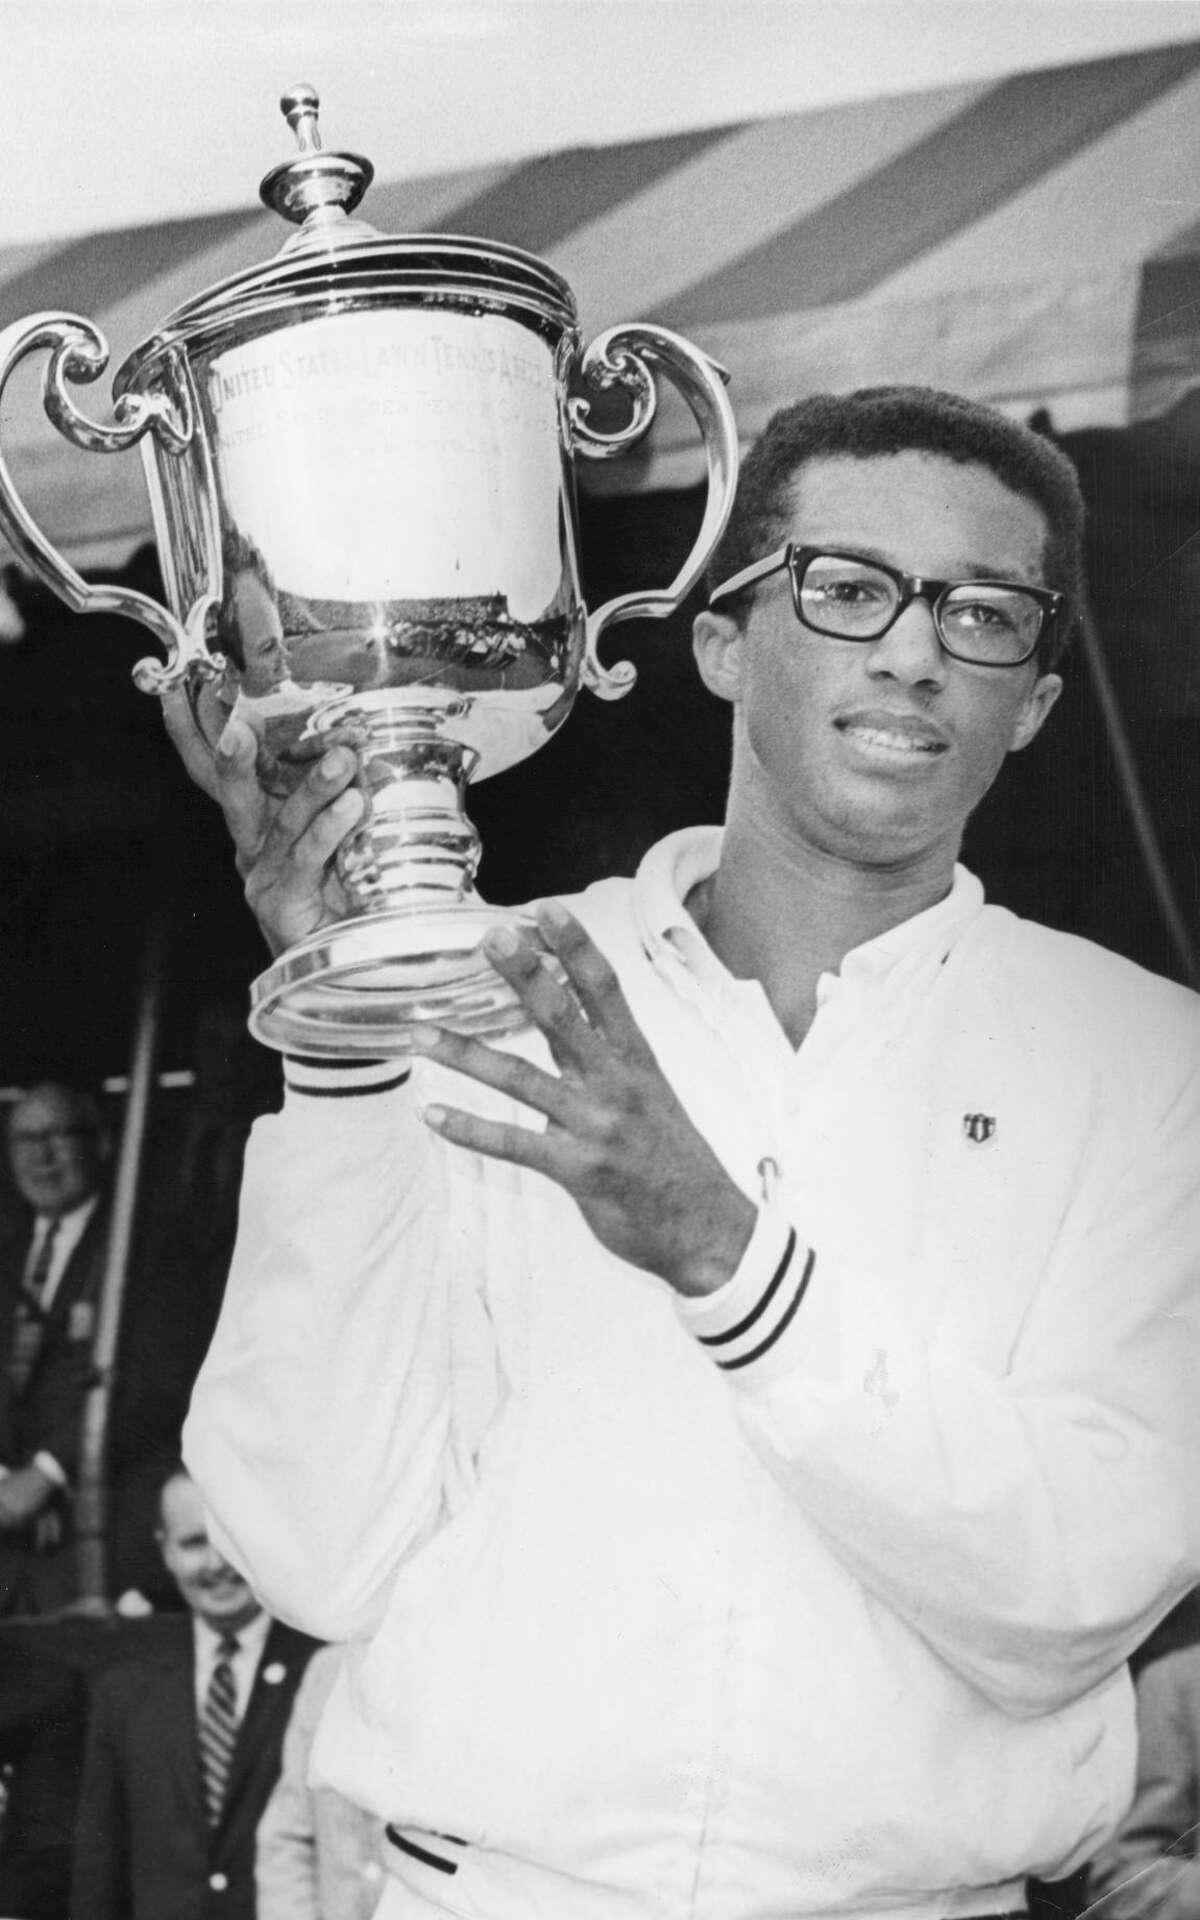 At the U.S. Open, Arthur Ashe proudly holds the winner's trophy, gained by beating Tom Okker on the left, who holds his Silver Tray. September 10, 1968. (Photo by William N. Jacobellis/New York Post Archives /(c) NYP Holdings, Inc. via Getty Images)